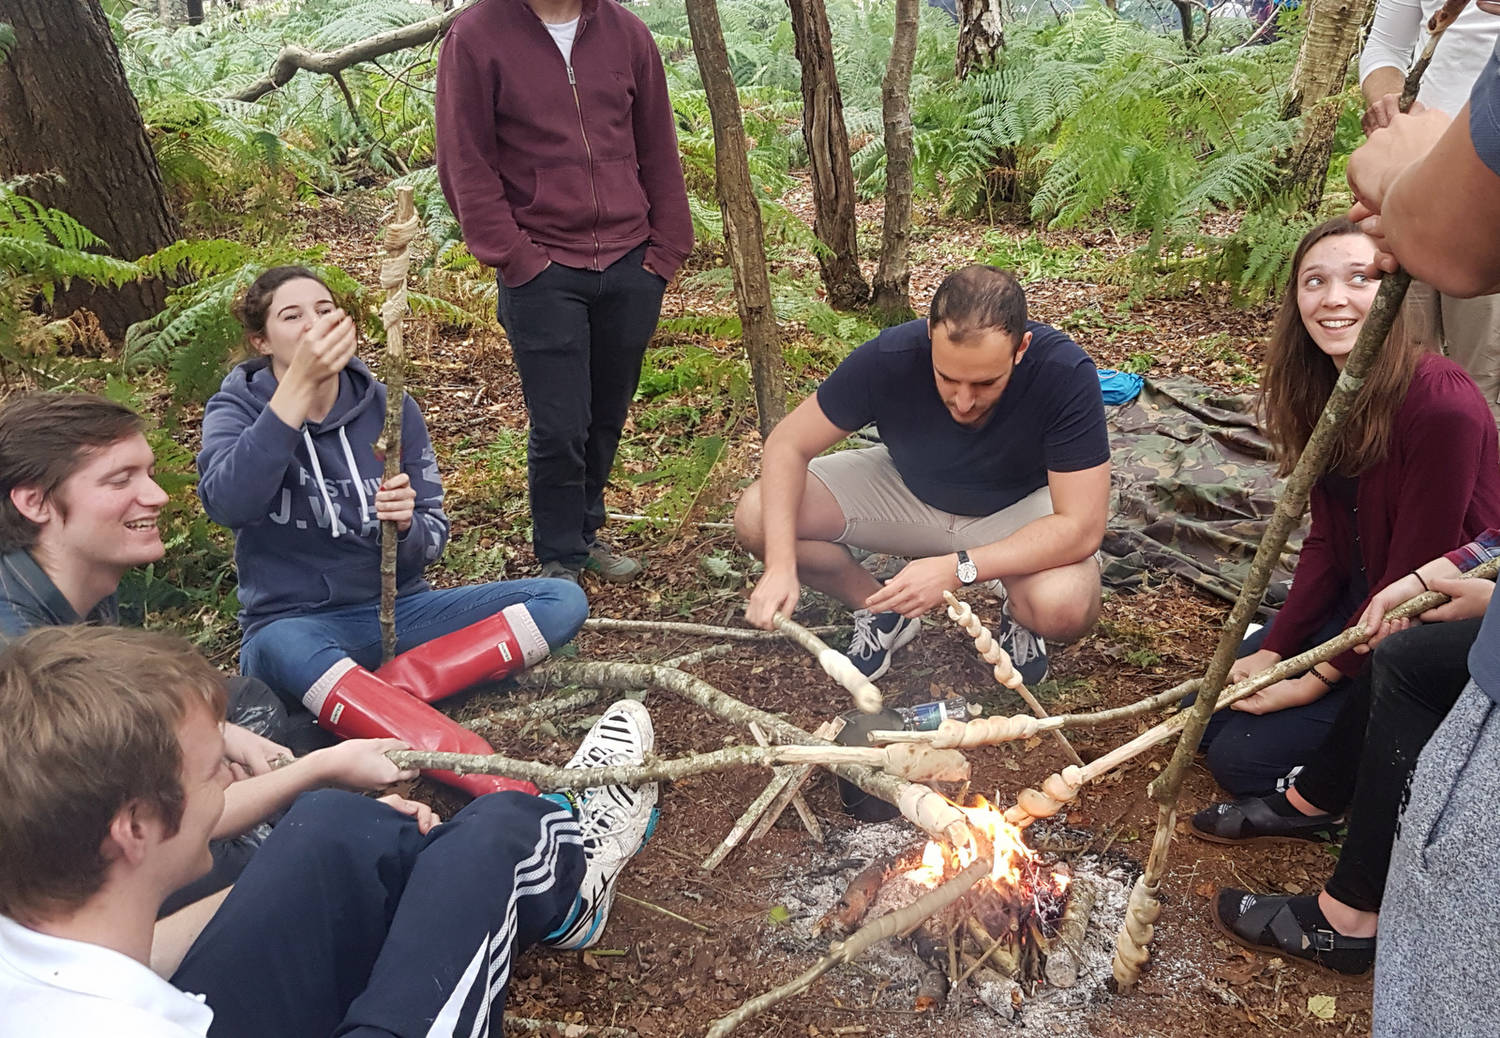 A group of people cooking over a campfire in the woods